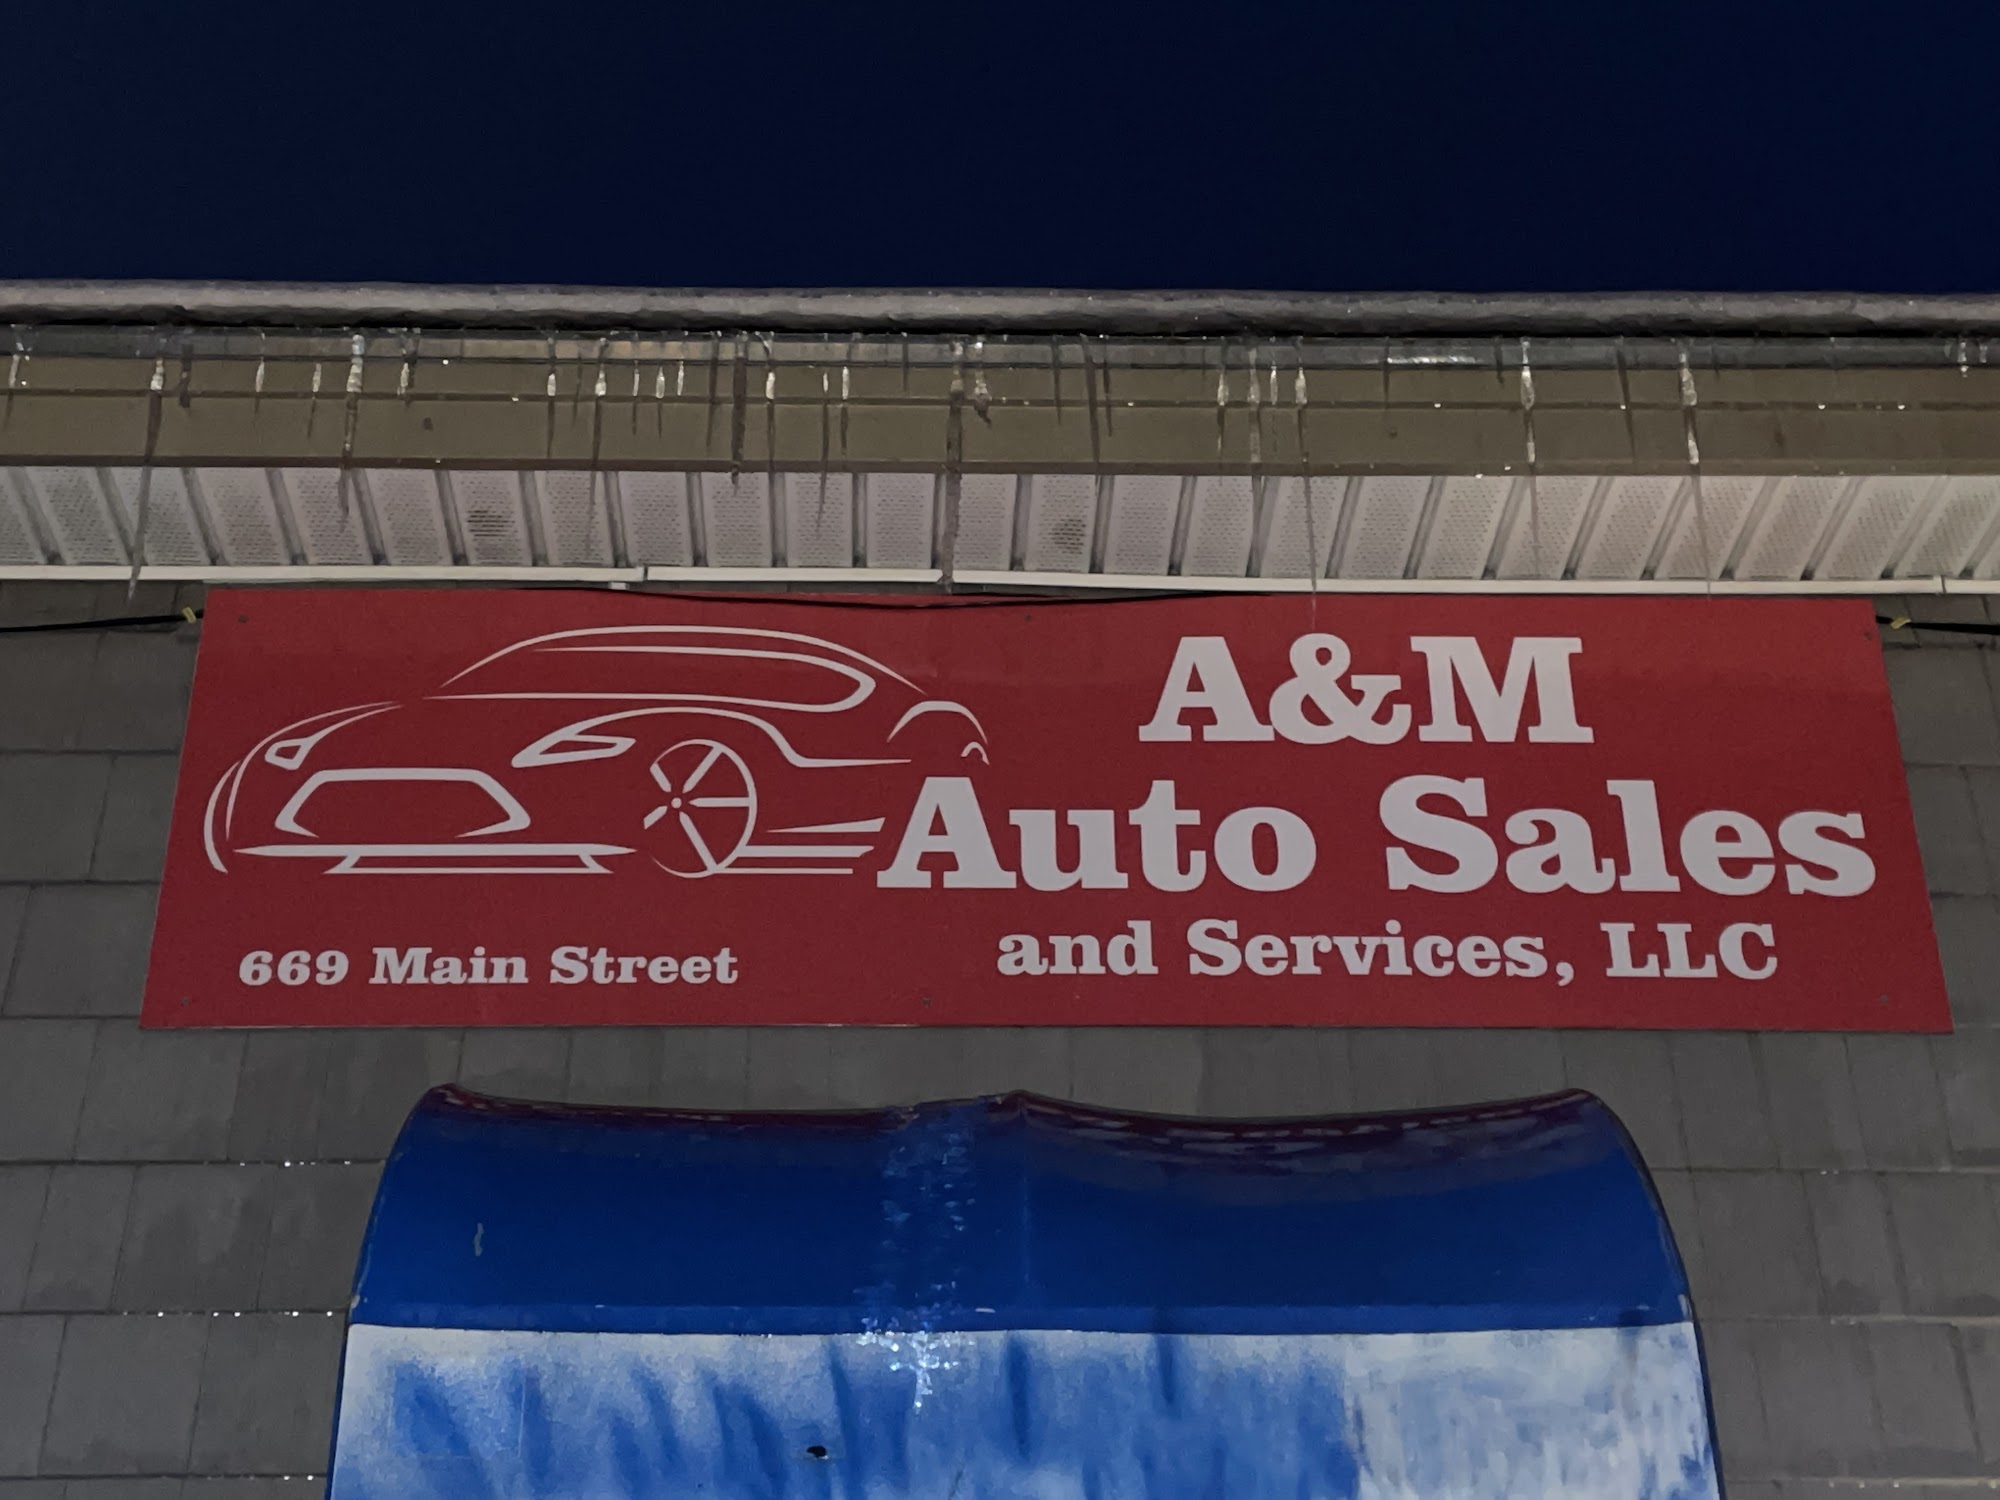 A&M Auto Sales and Service